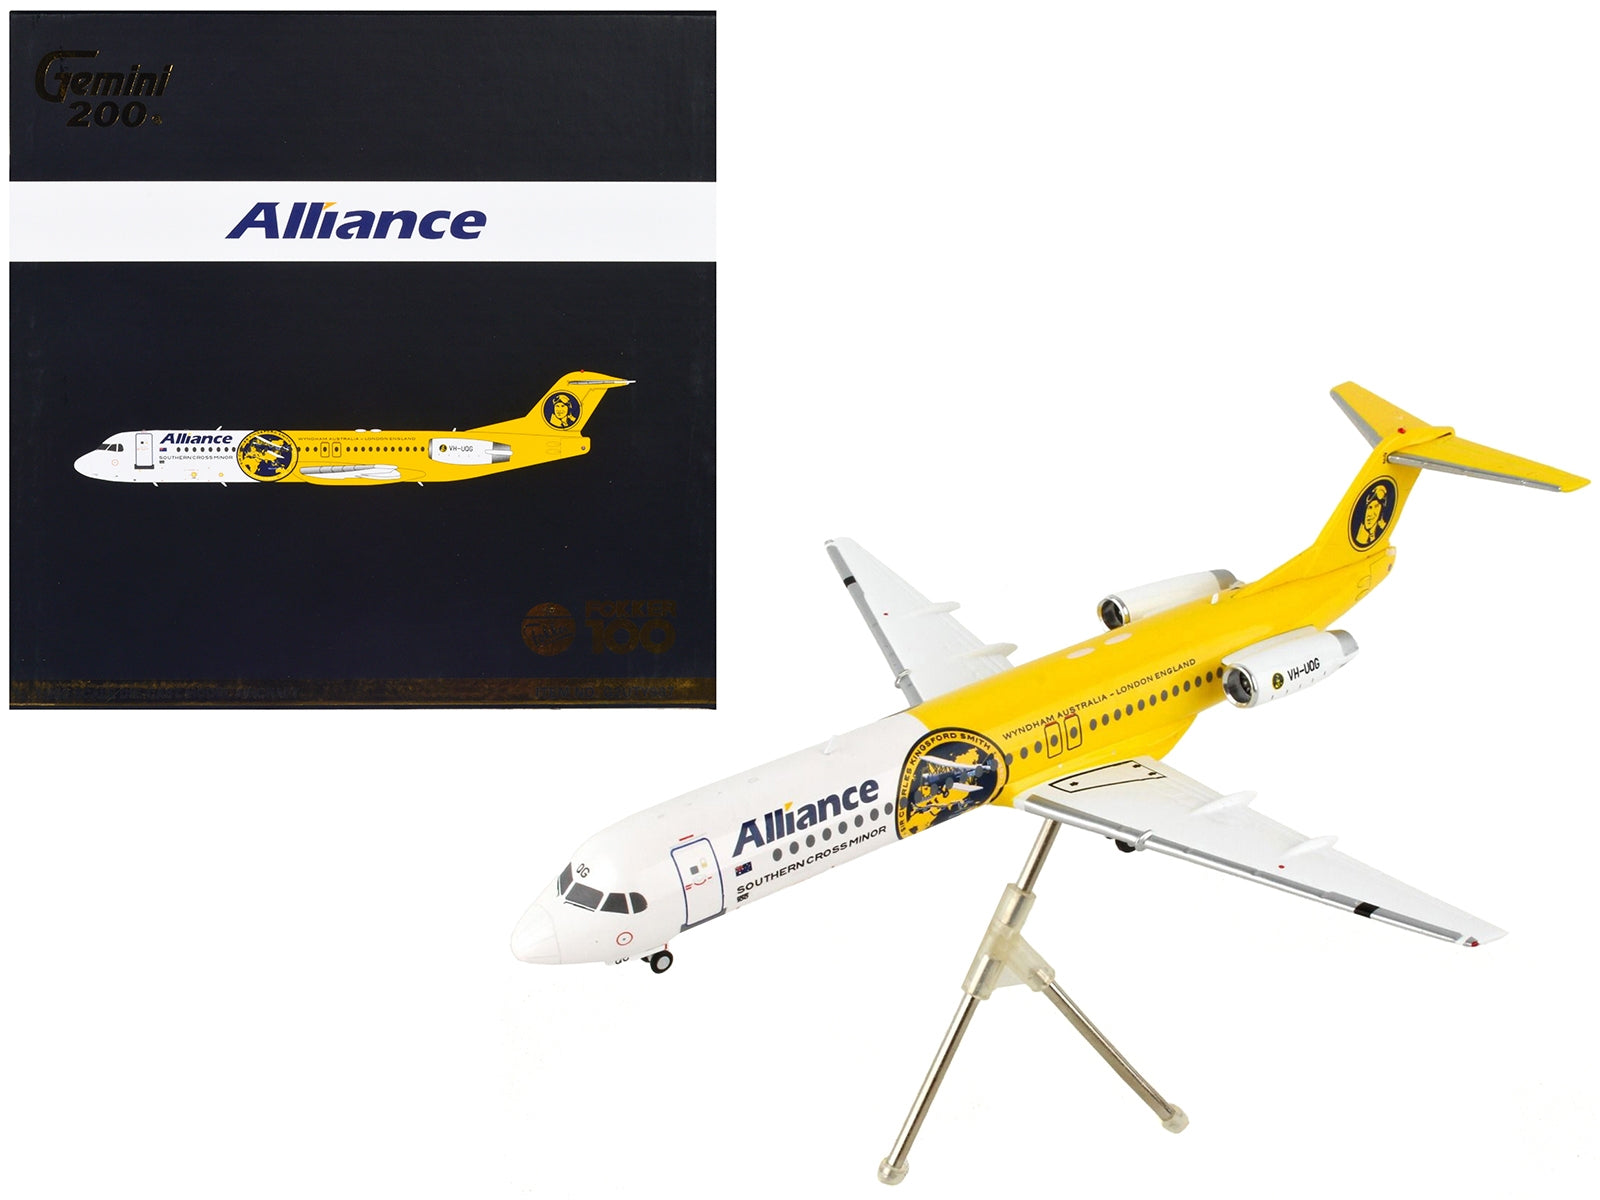 Fokker F100 Commercial Aircraft "Alliance Airlines" White and Yellow "Gemini 200" Series 1/200 Diecast Model Airplane by GeminiJets